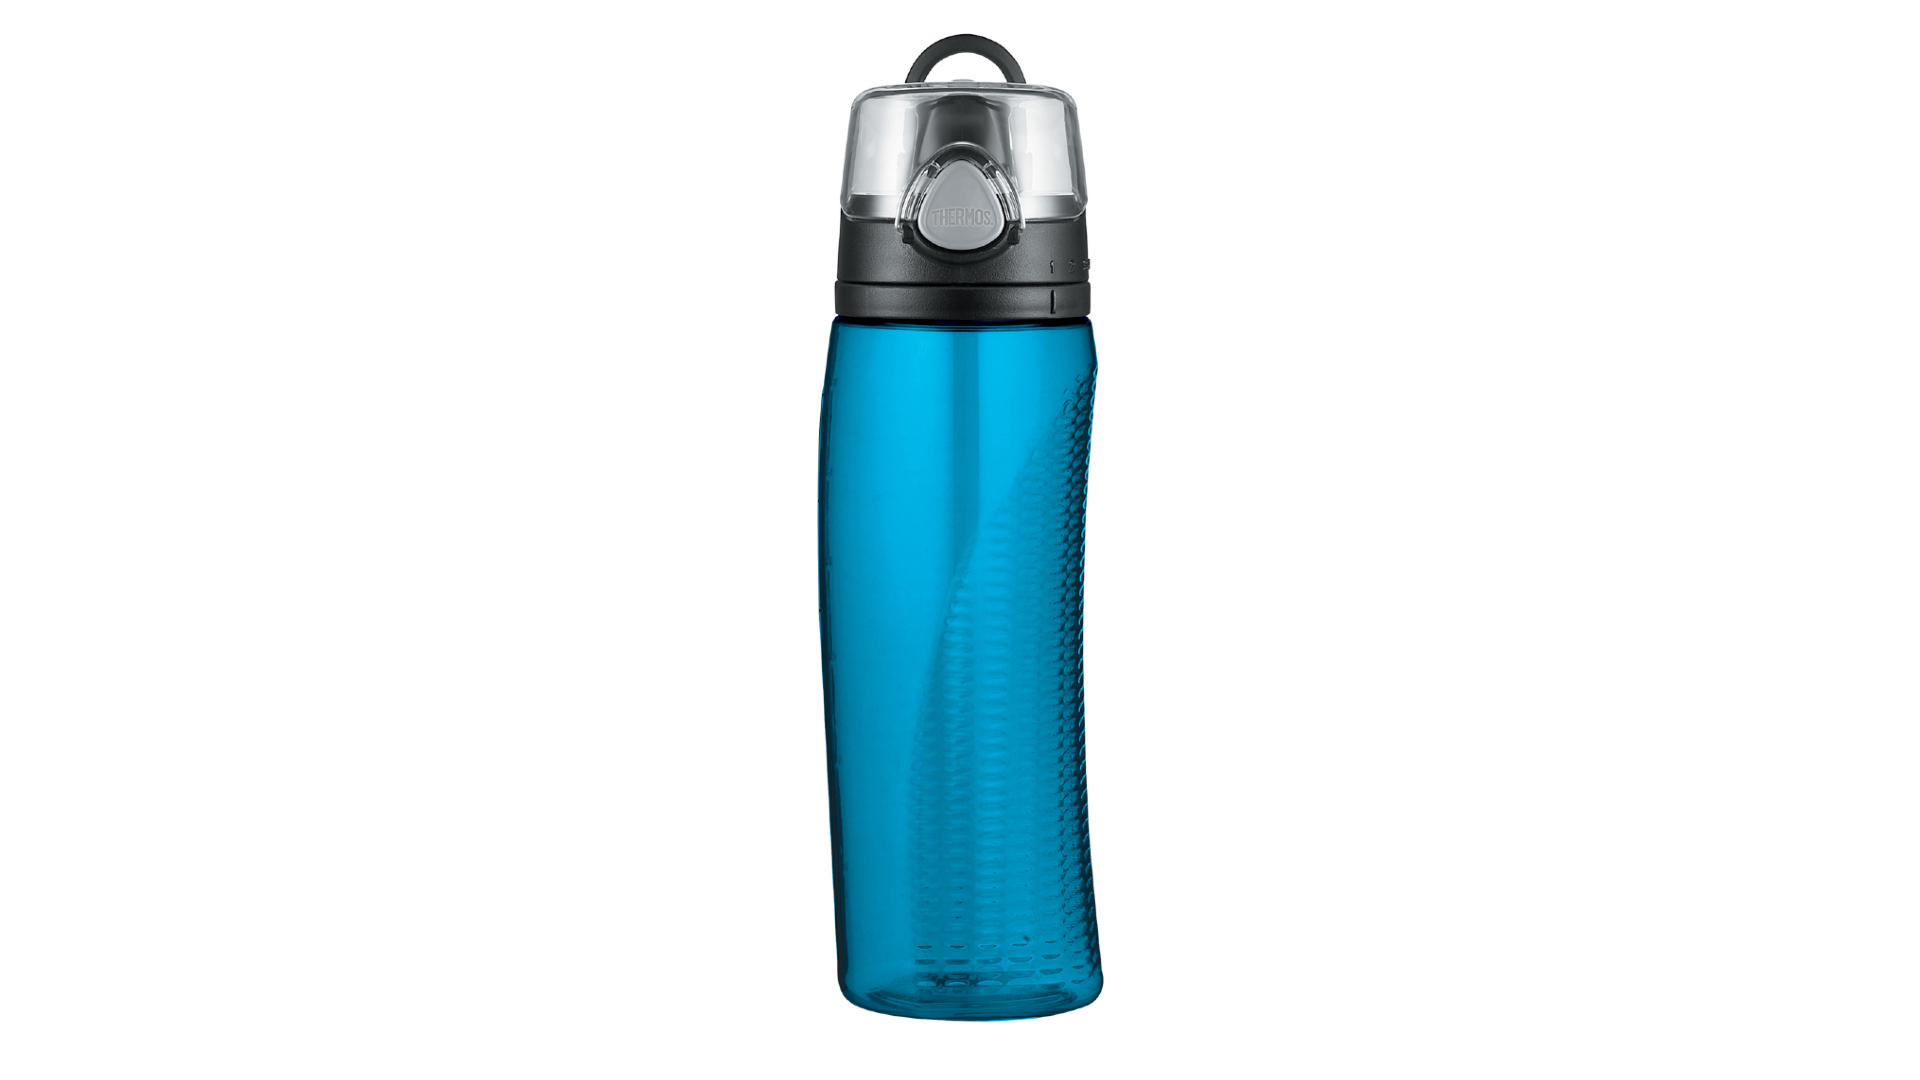 Best water bottles: Image of Thermos water bottle